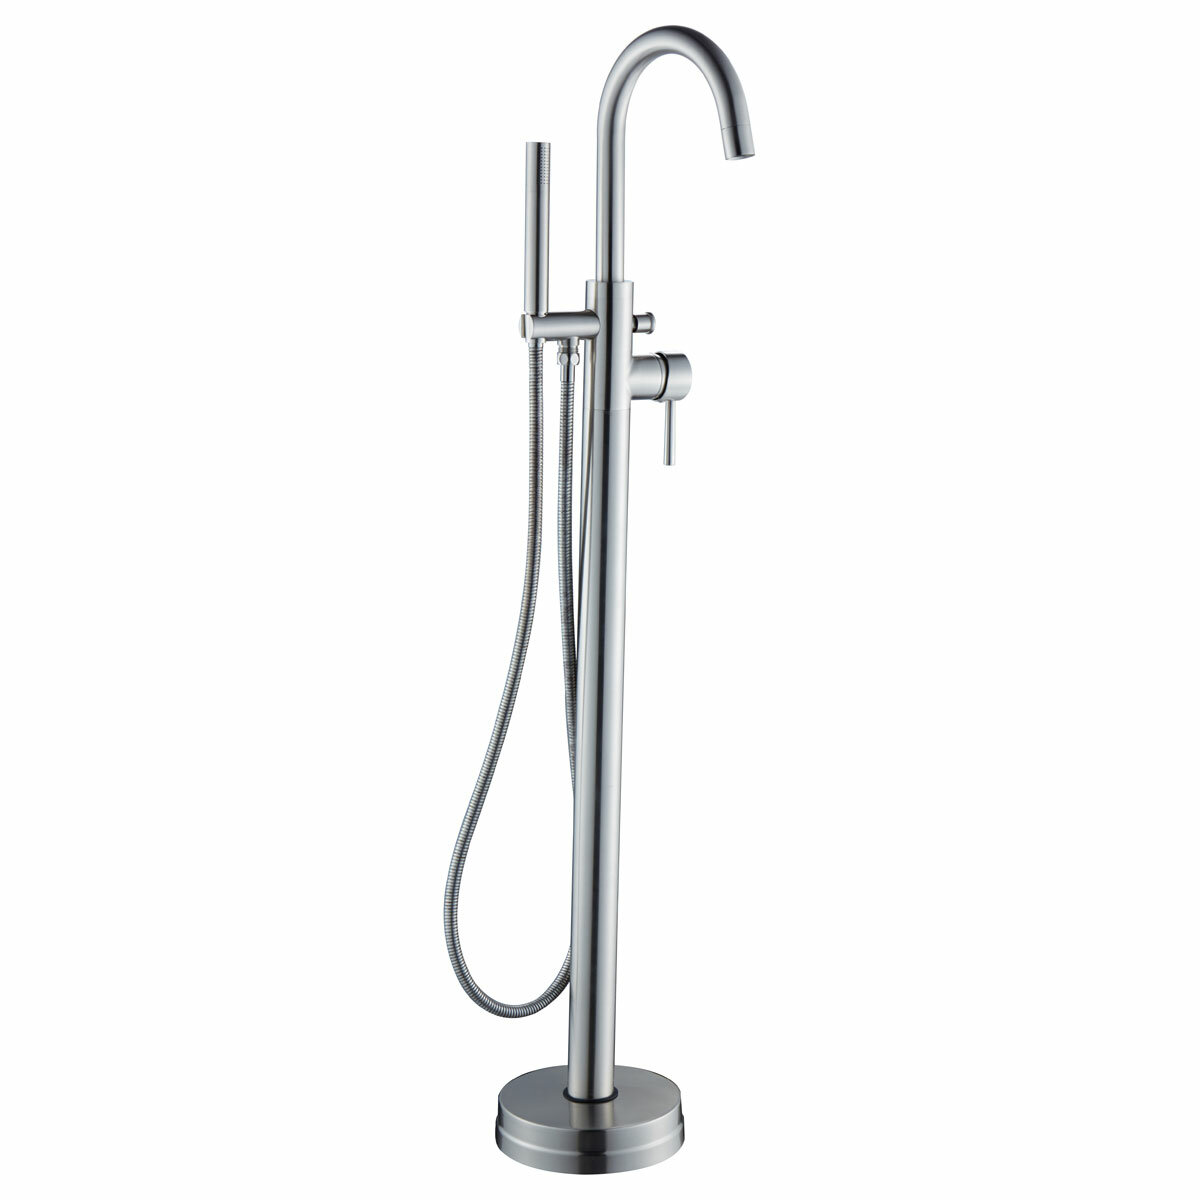 Lesscare Single Handle Floor Mounted Tub Faucet With Hand Shower